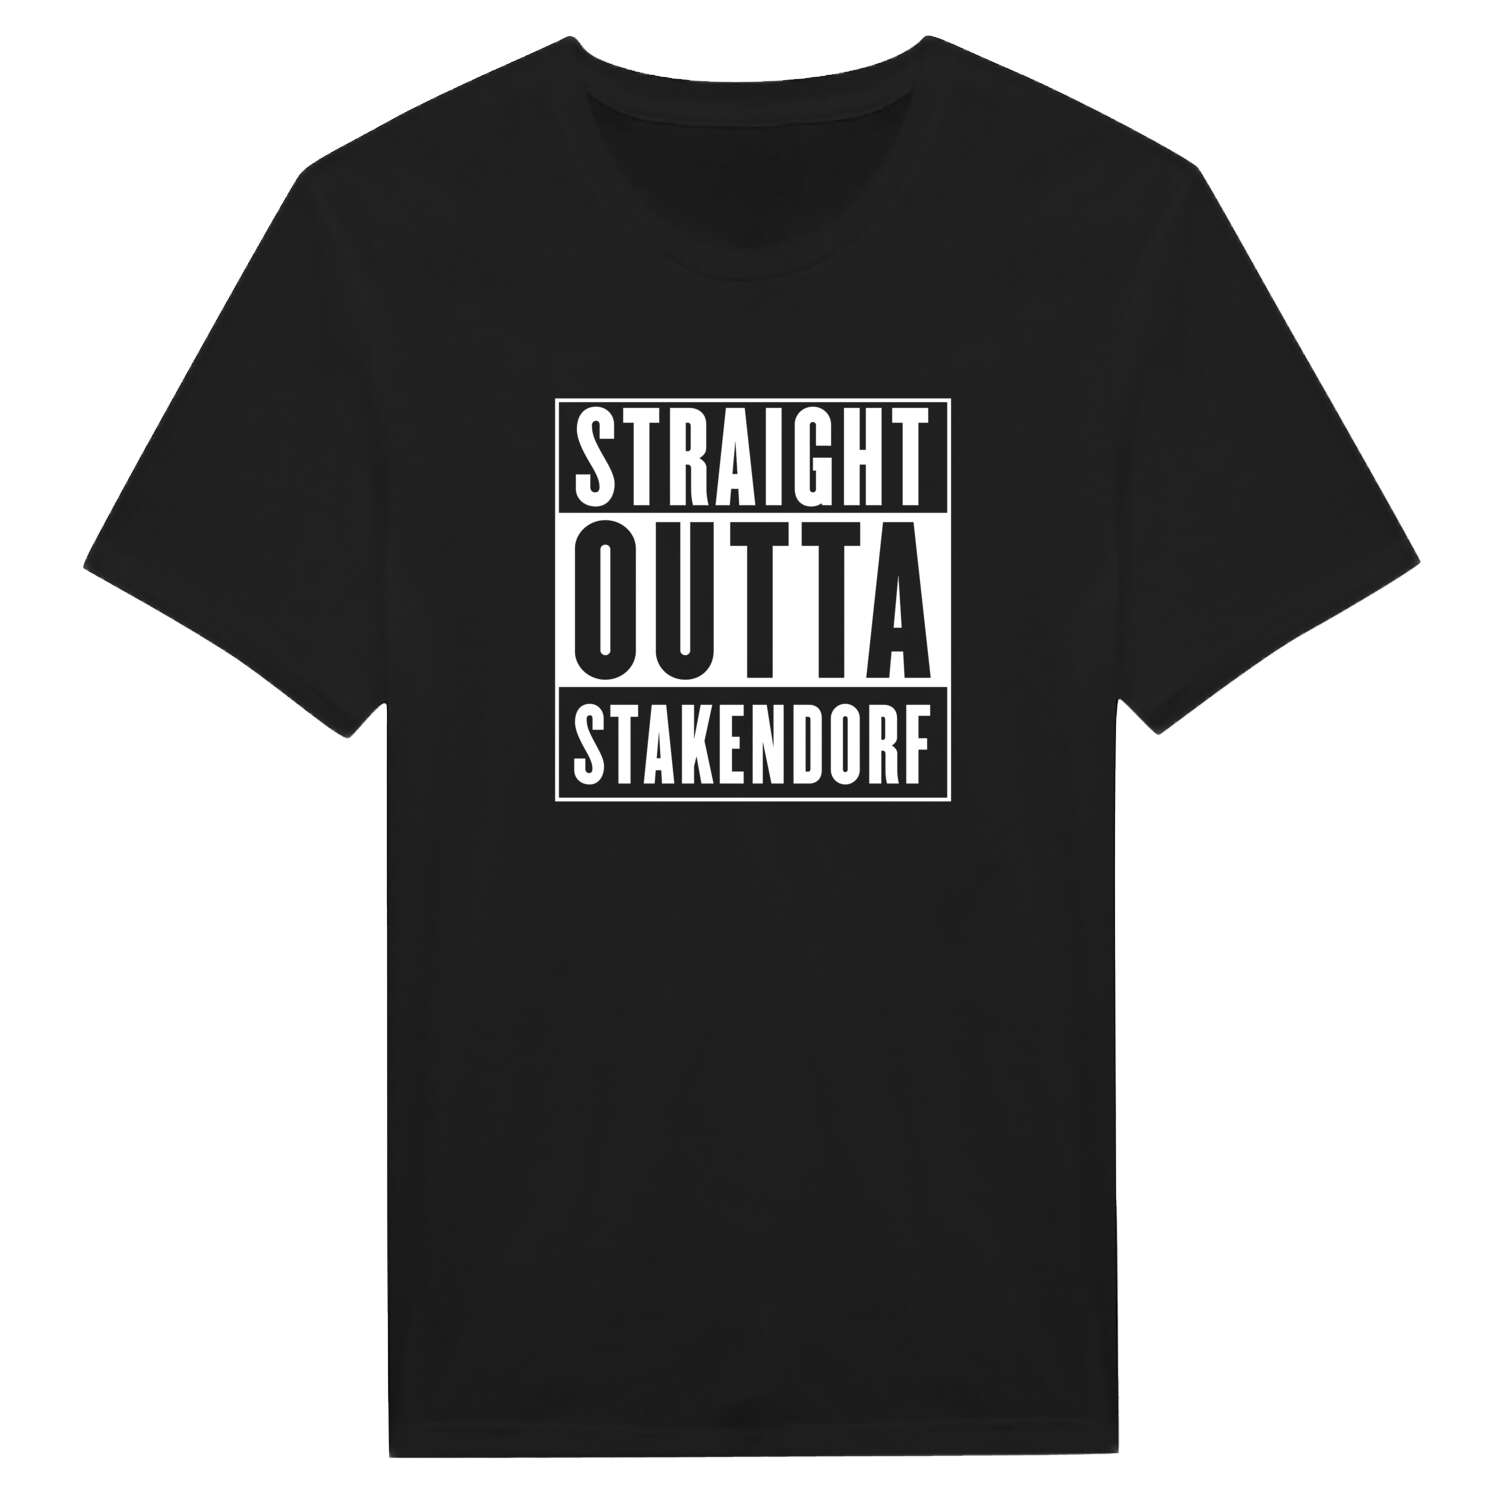 Stakendorf T-Shirt »Straight Outta«